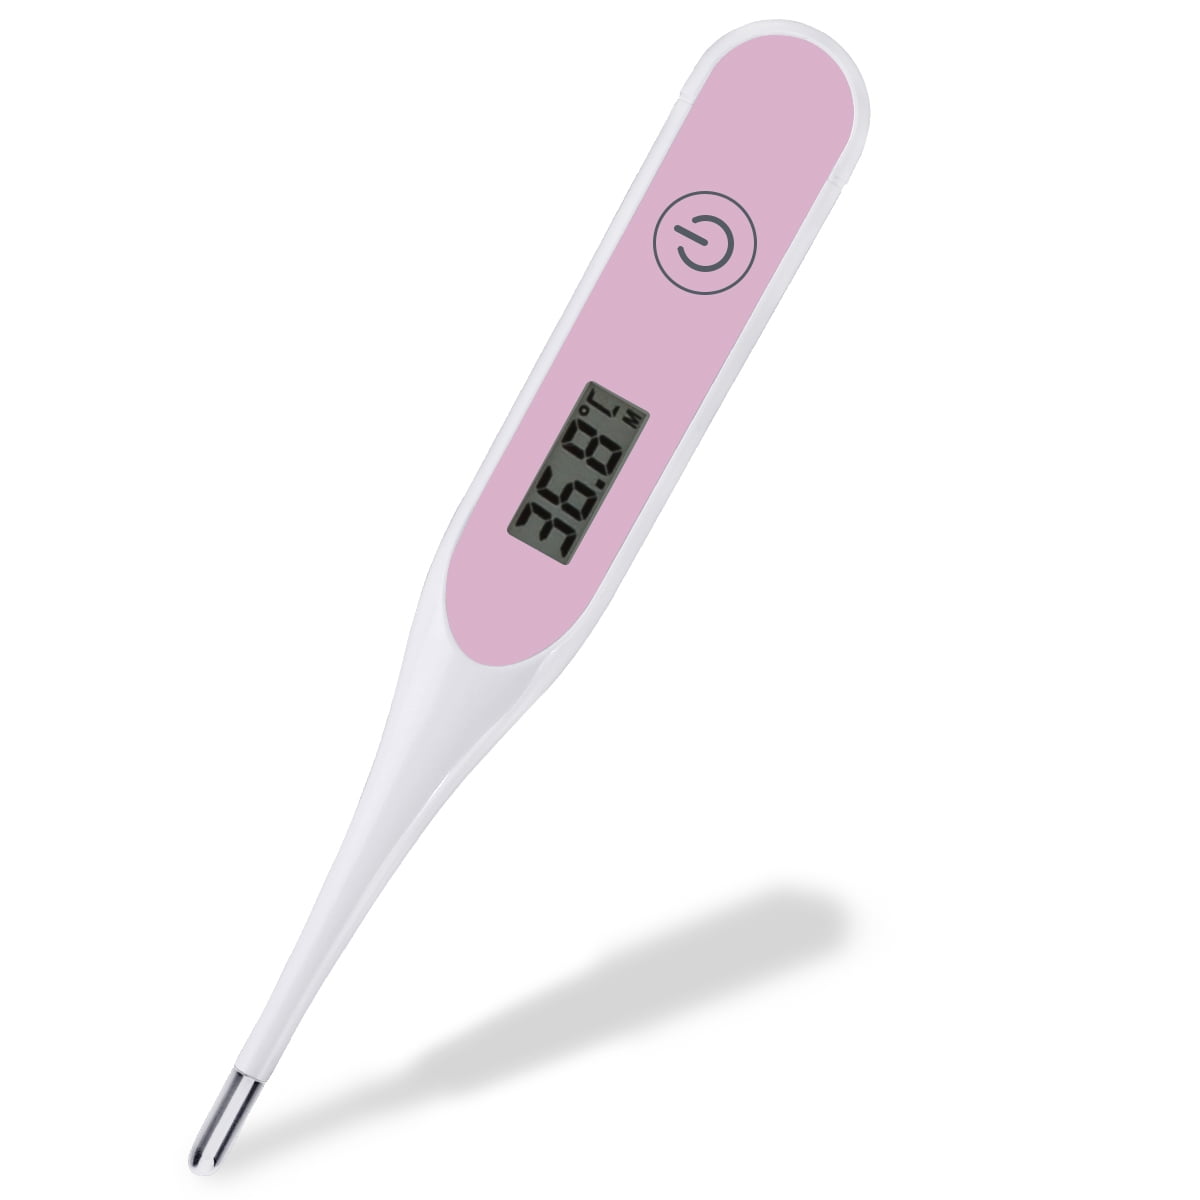 Baby armpit thermometer